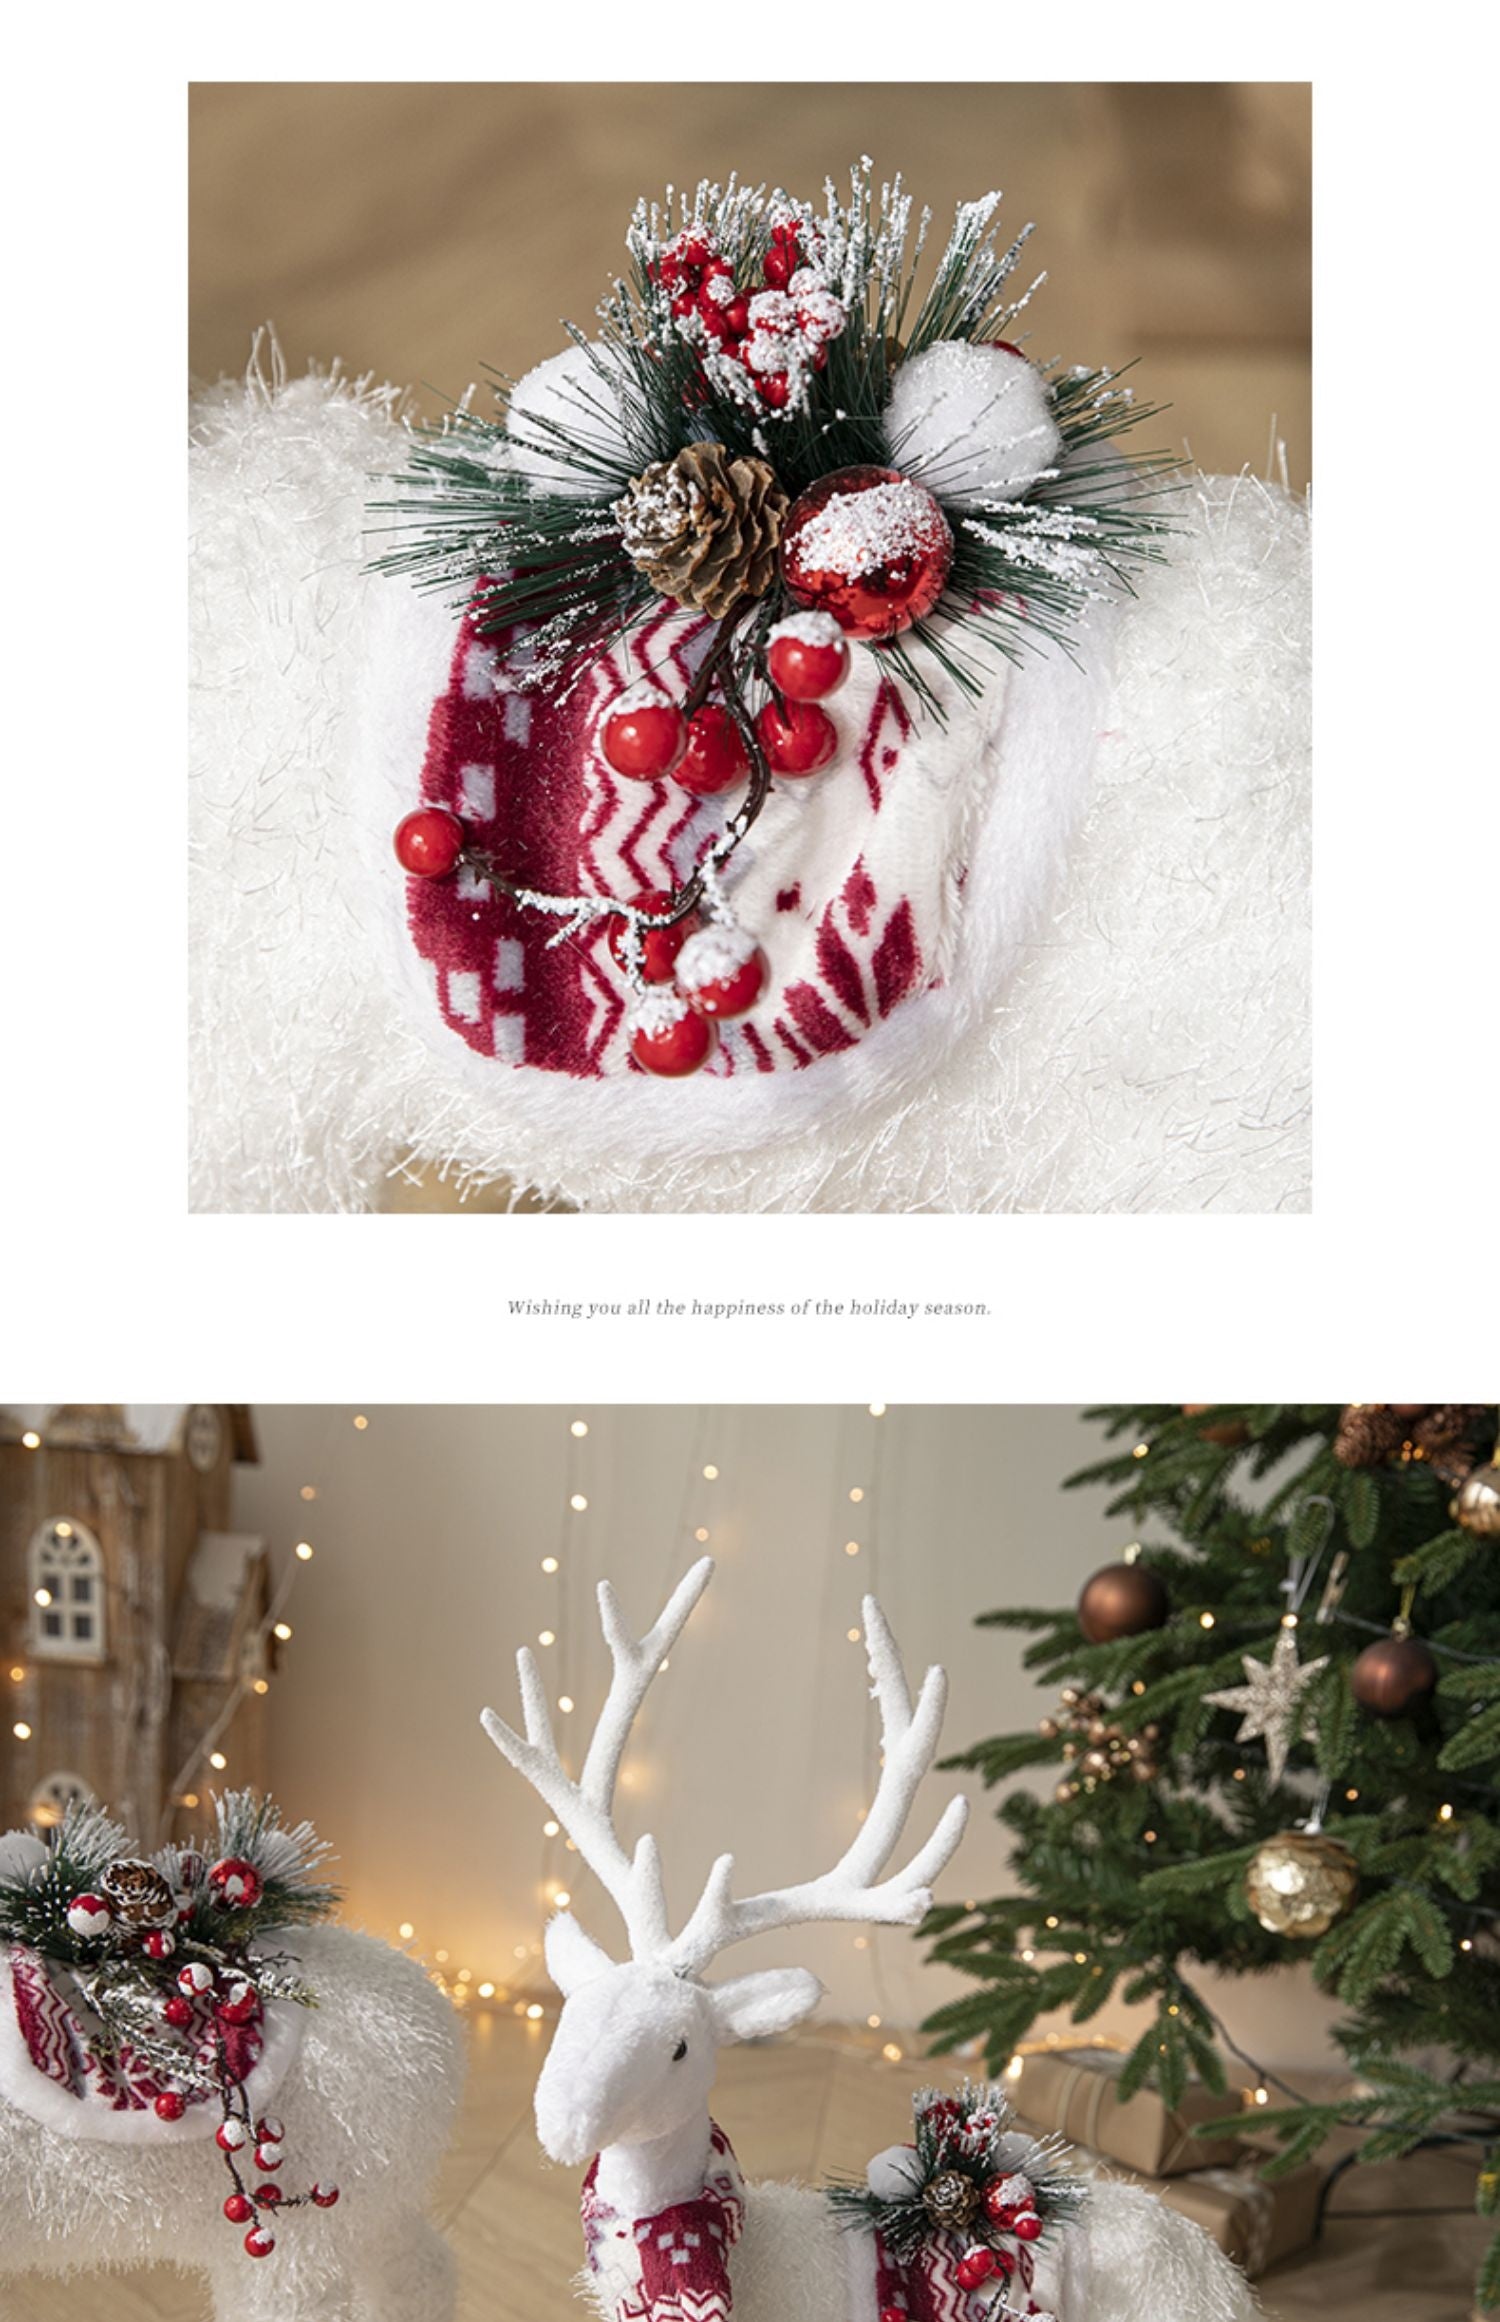 Christmas Decorations White David's Deer Doll Doll Home Shopping Window Layout Christmas Tree Ornaments